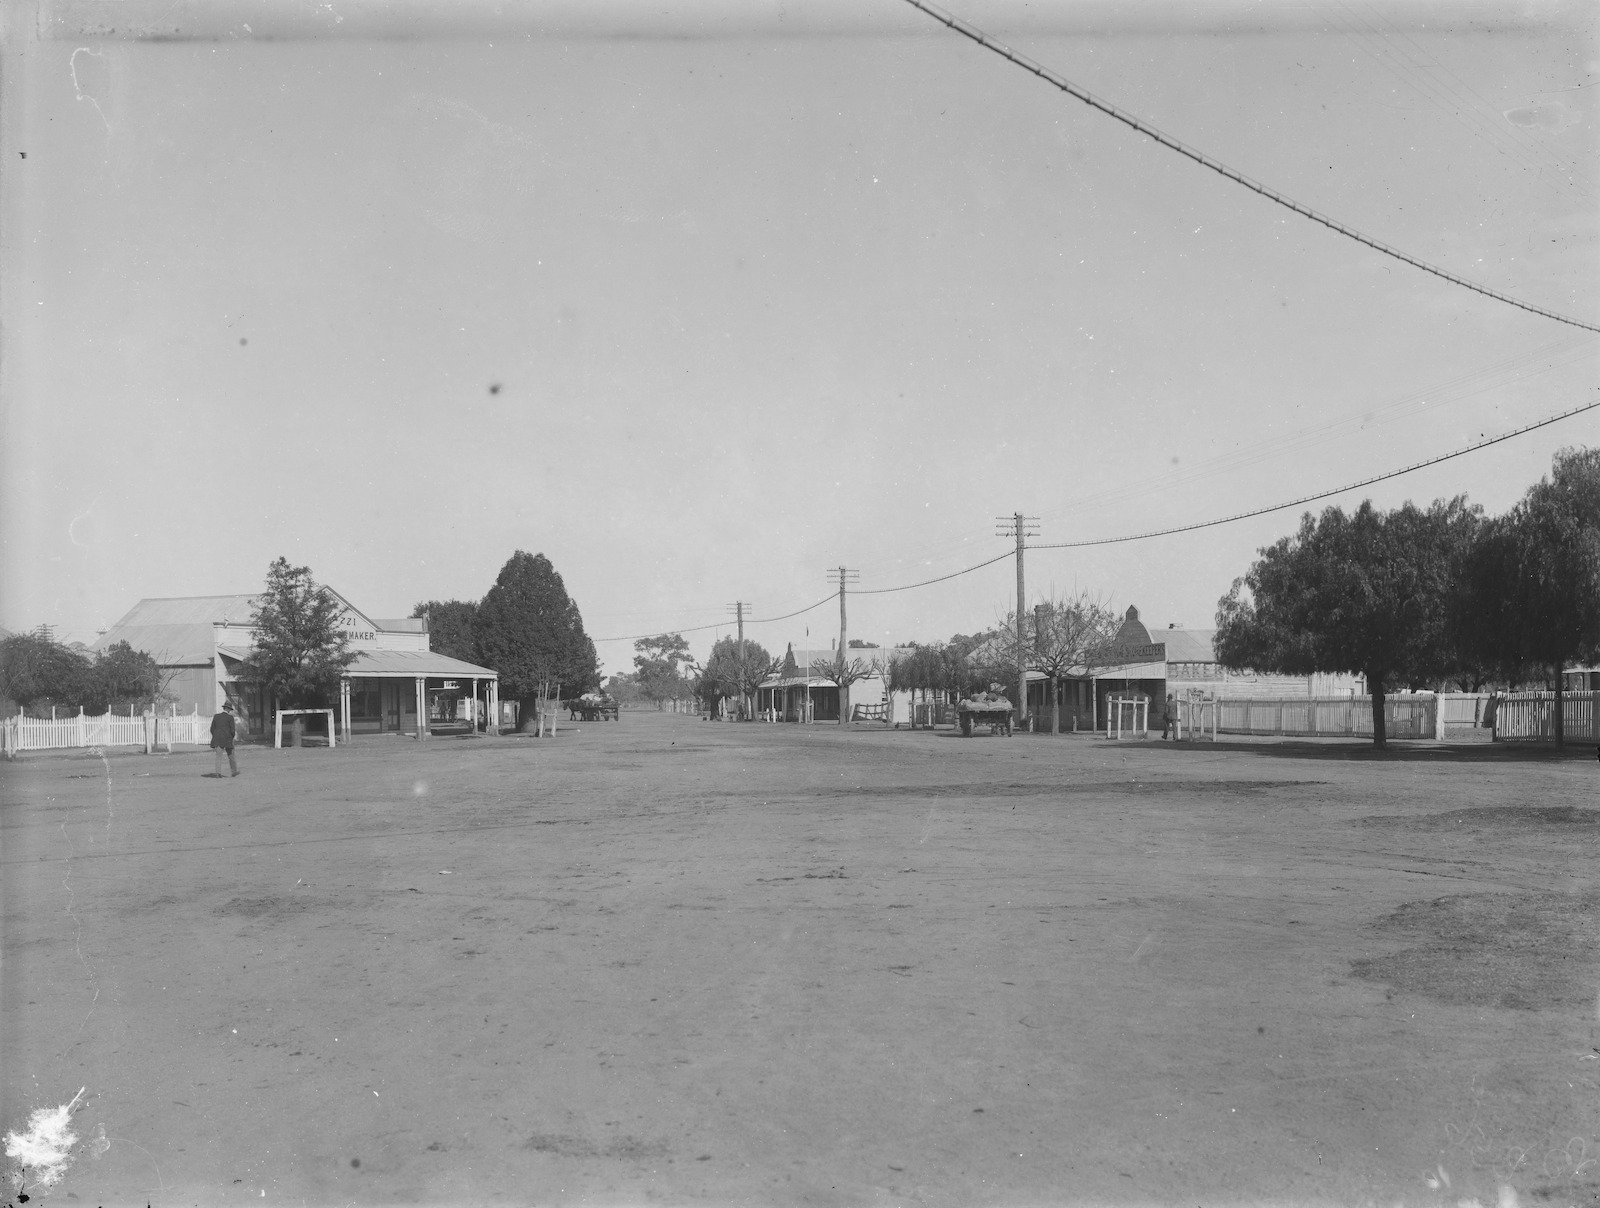 Wide, unpaved street in Cunnamulla, Queensland